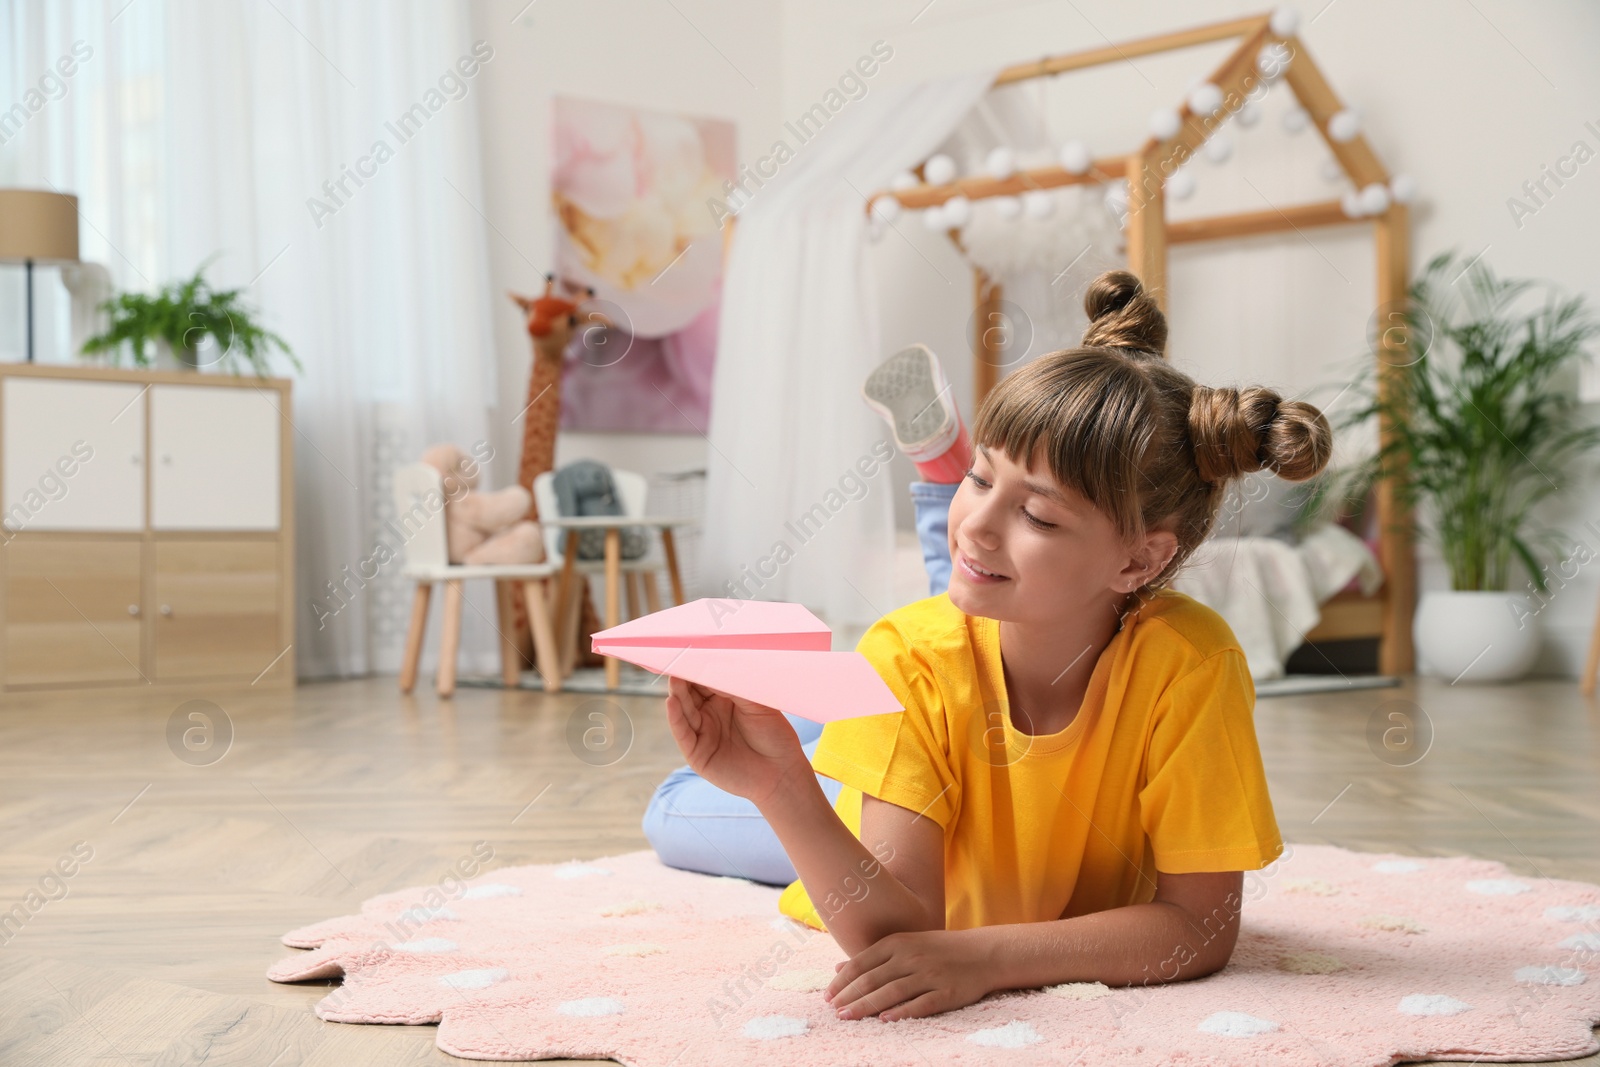 Photo of Cute little girl playing with paper plane on floor in room. Space for text